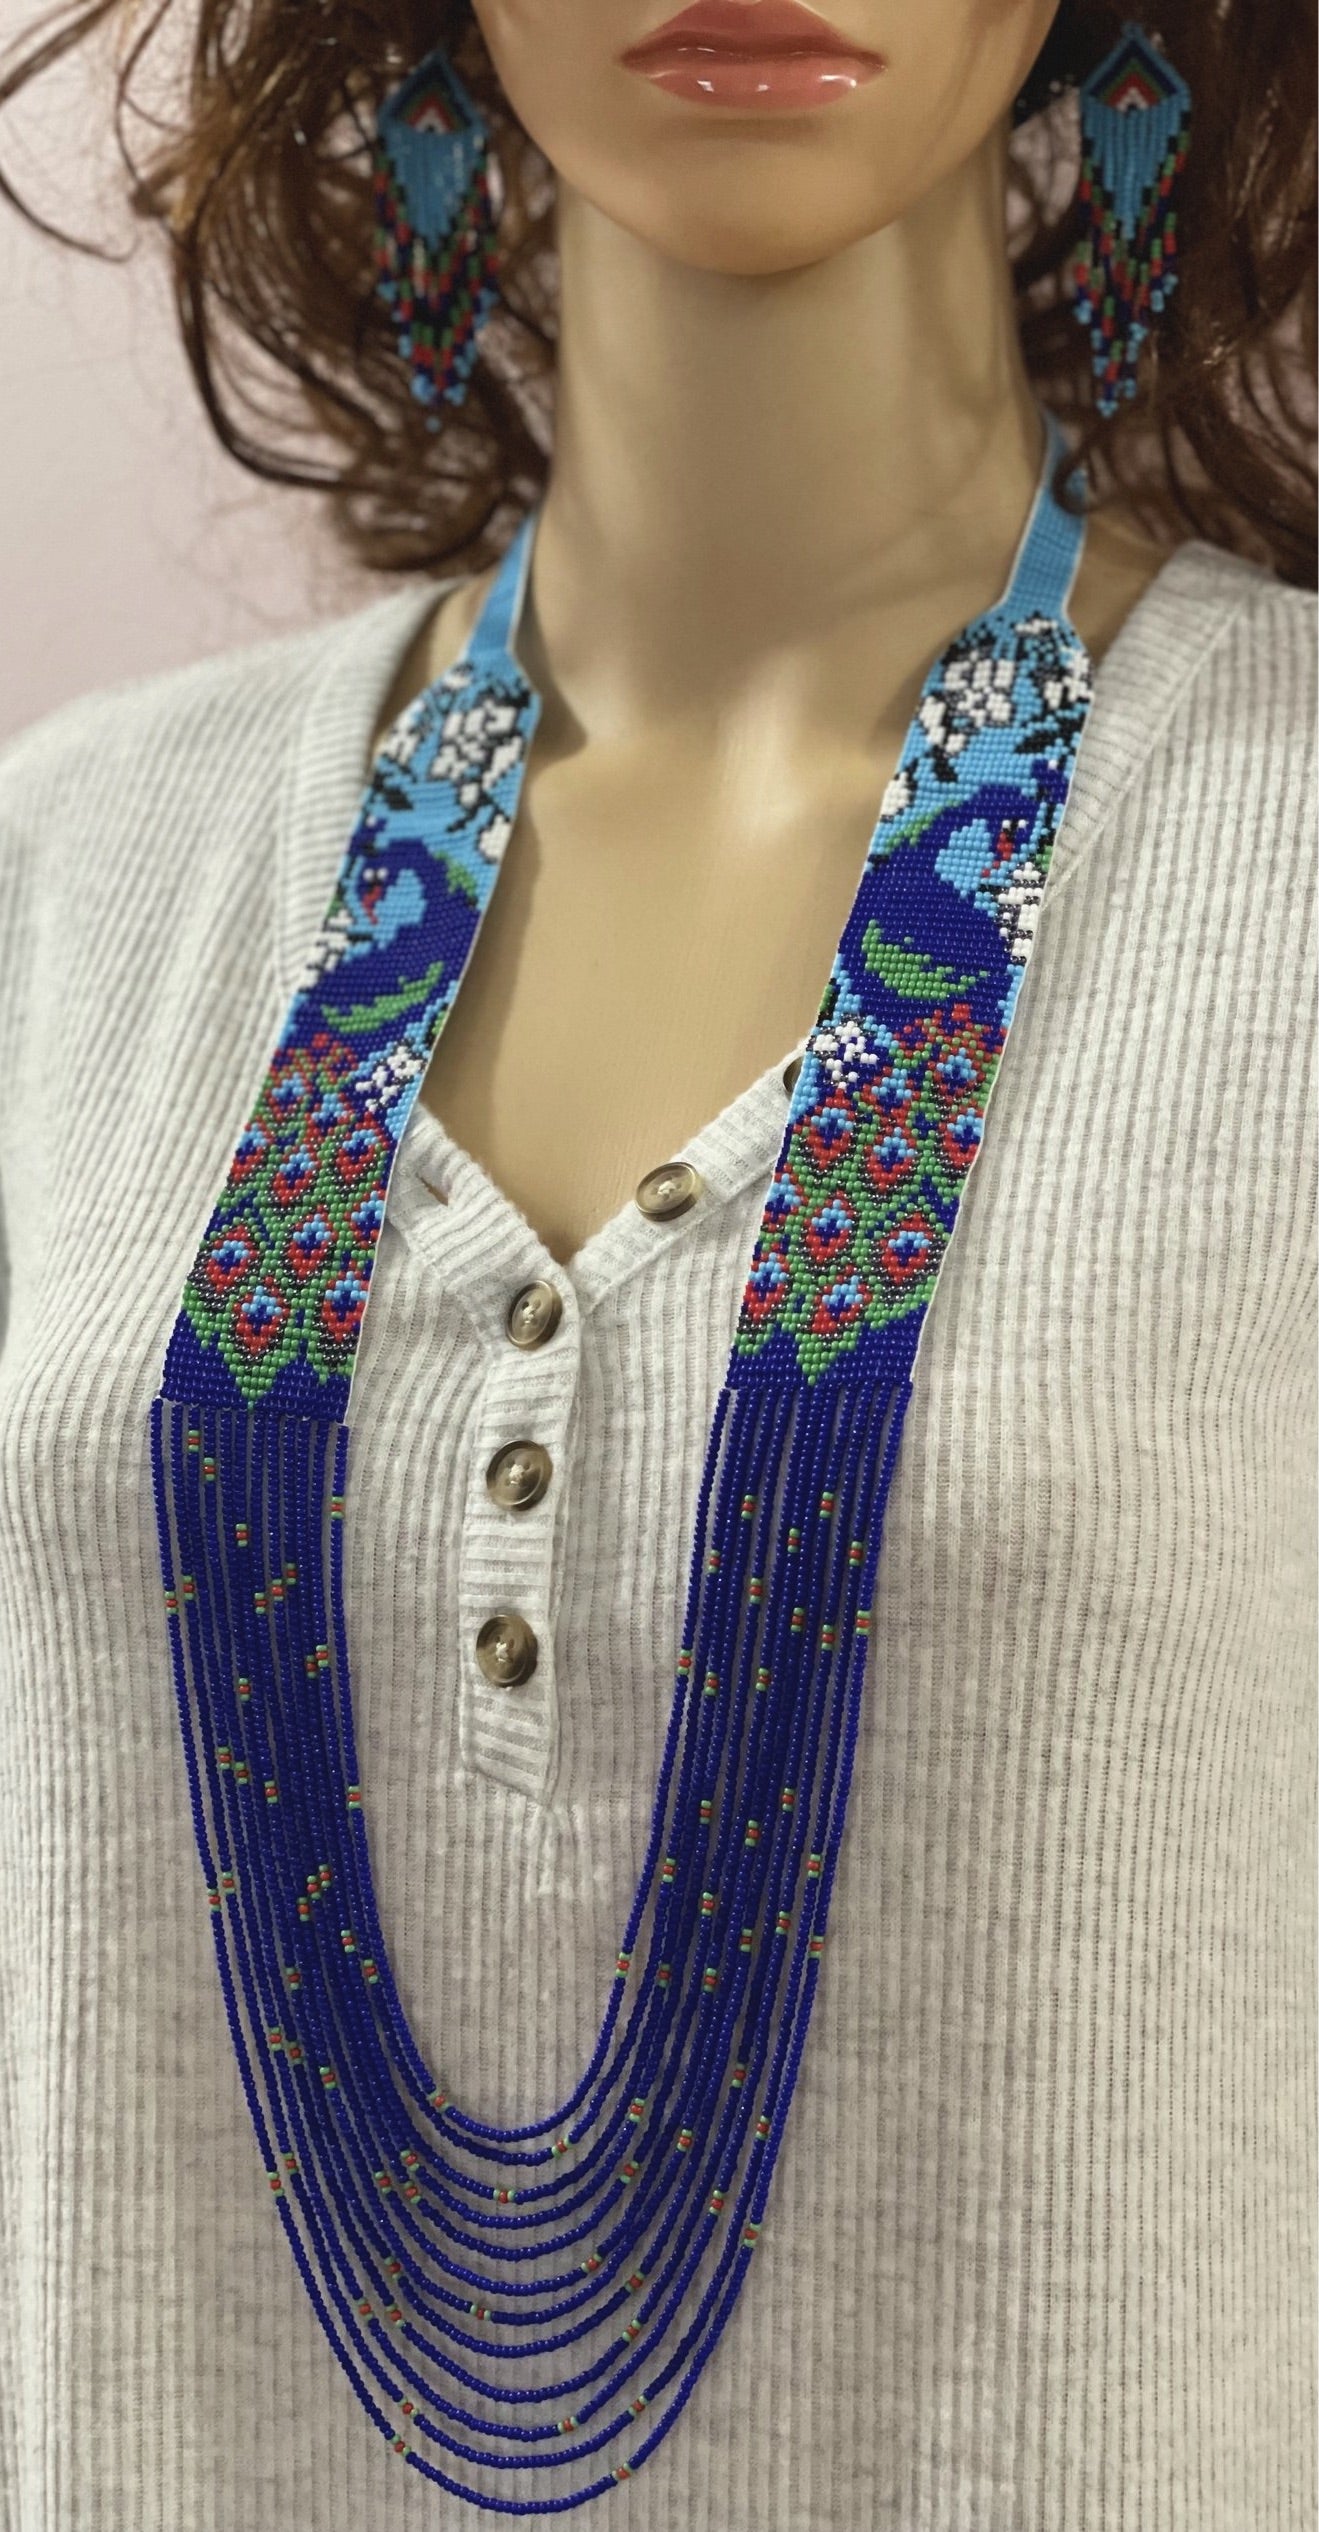 Handcrafted seed bead necklace earrings peacock jewelry design for Women